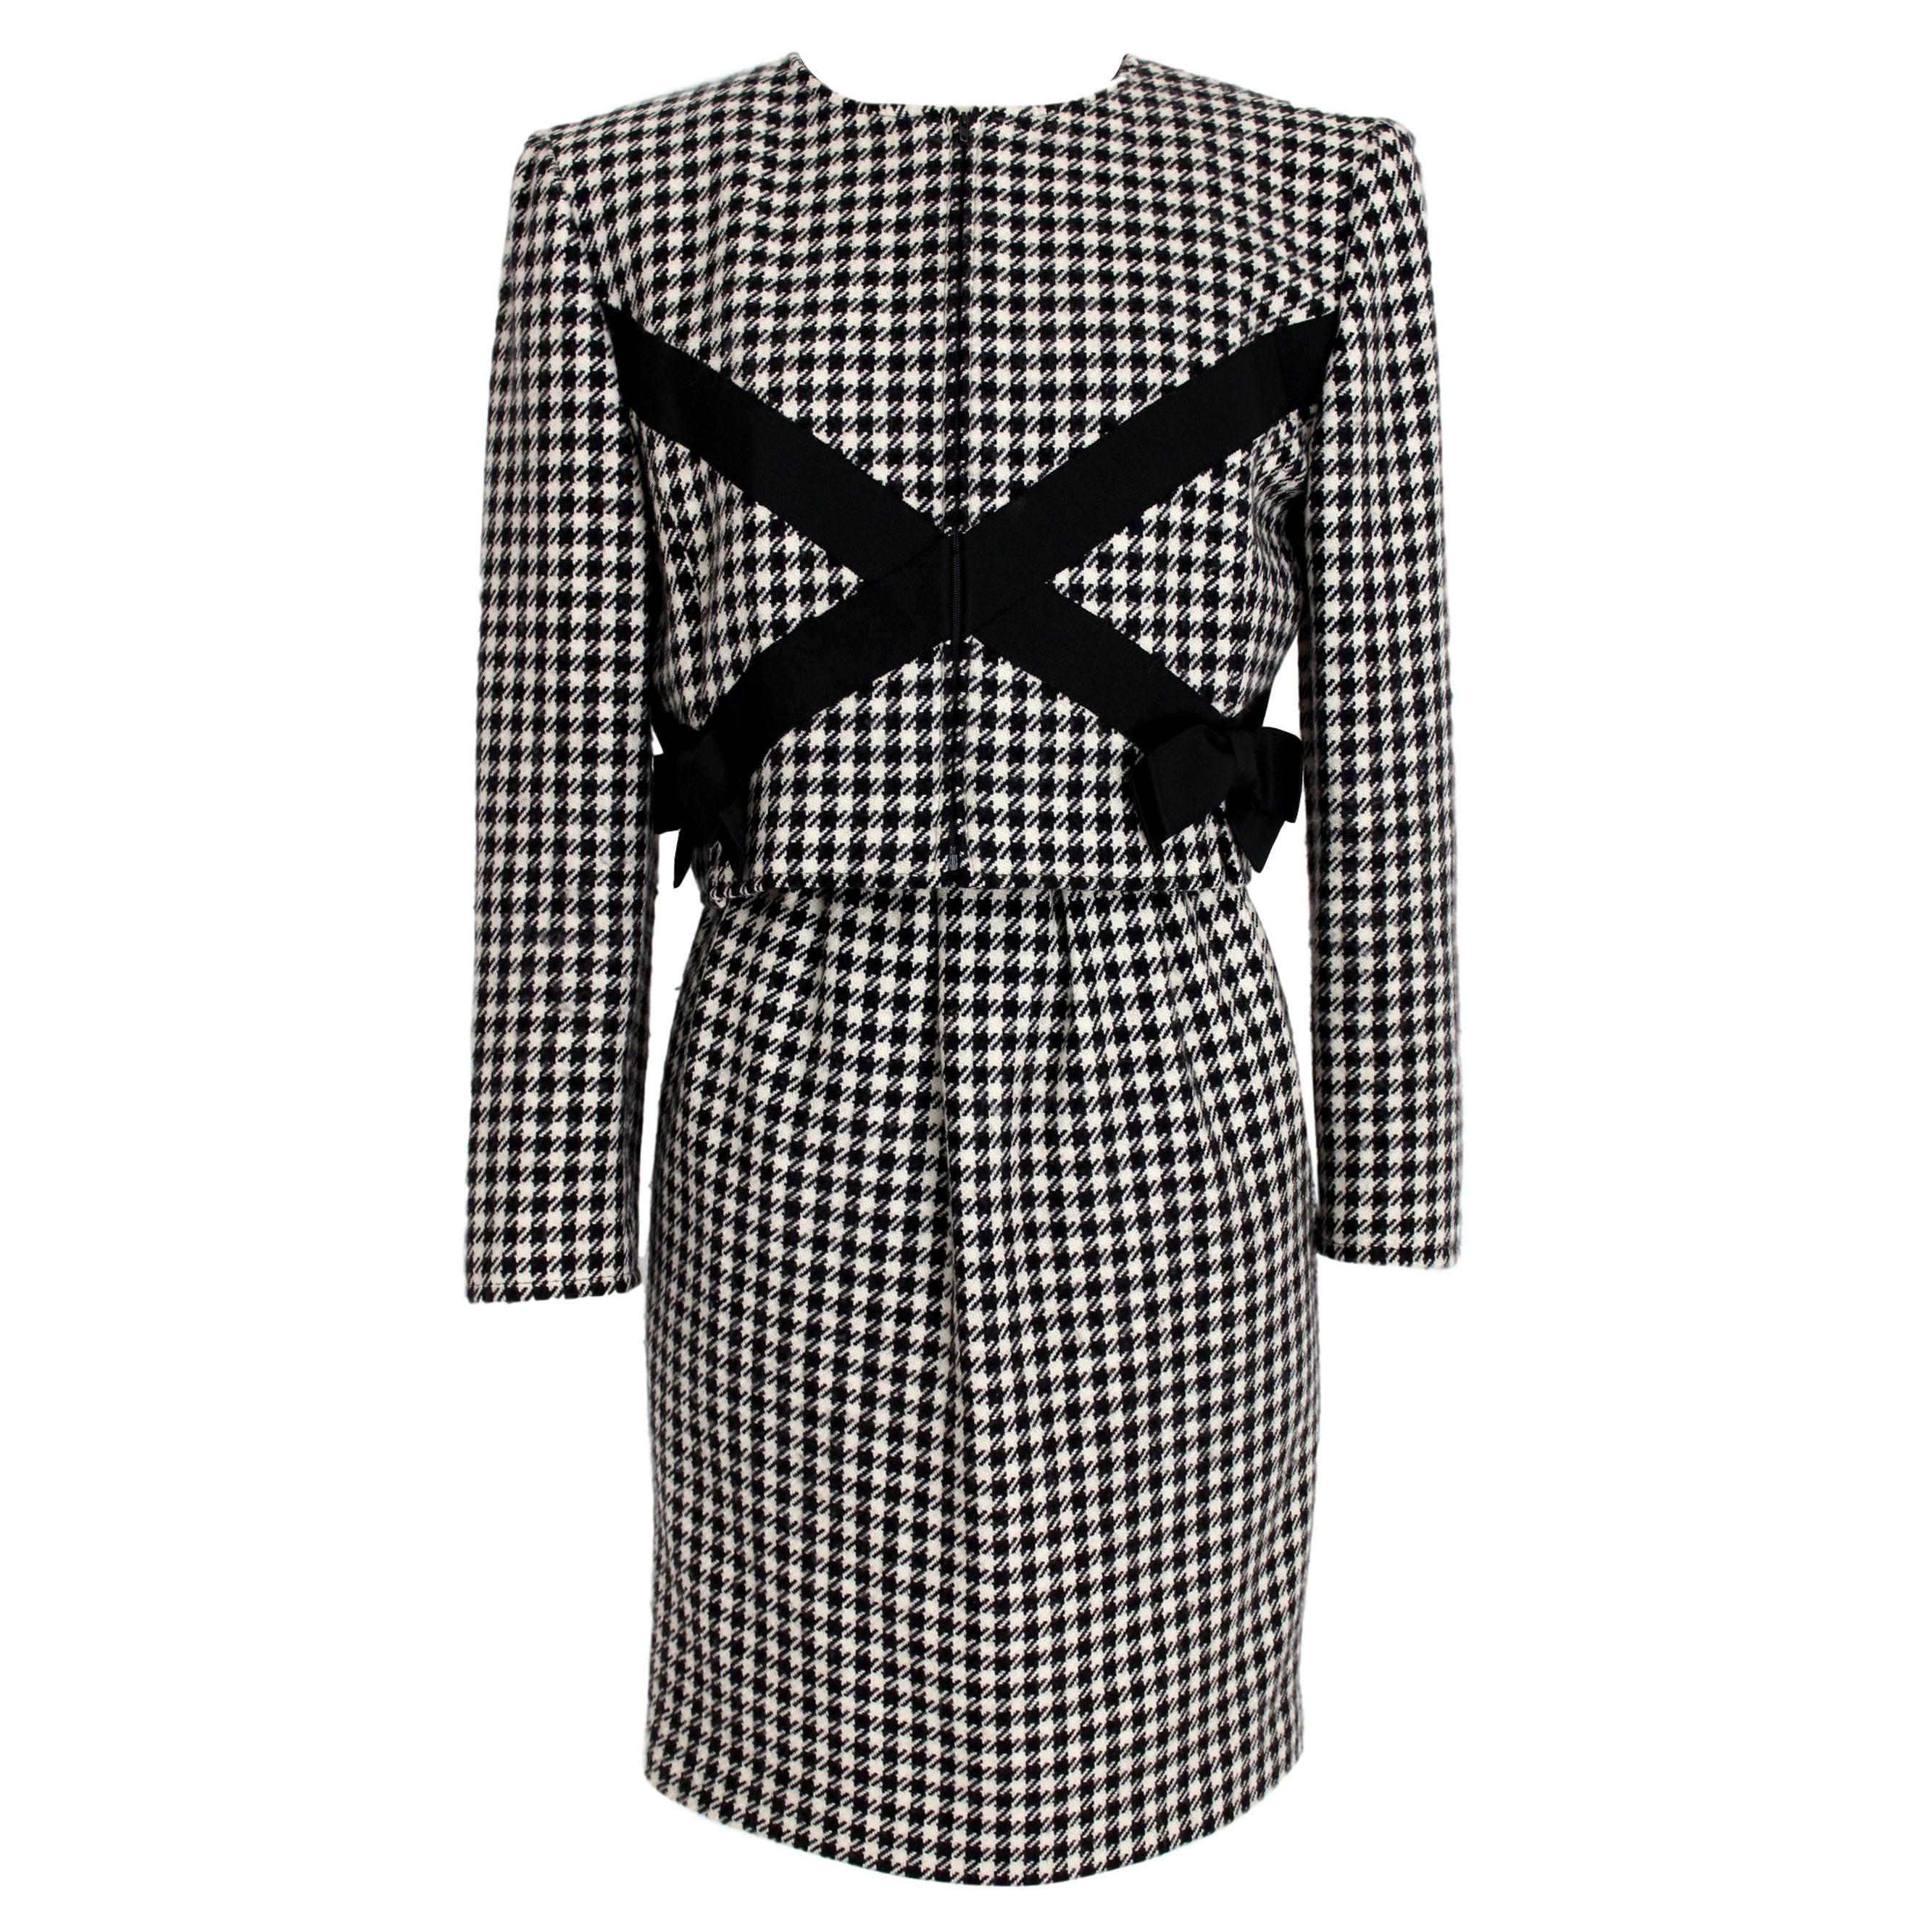 Valentino Boutique Black White Wool Houndstooth Evening Skirt Suit 1980s